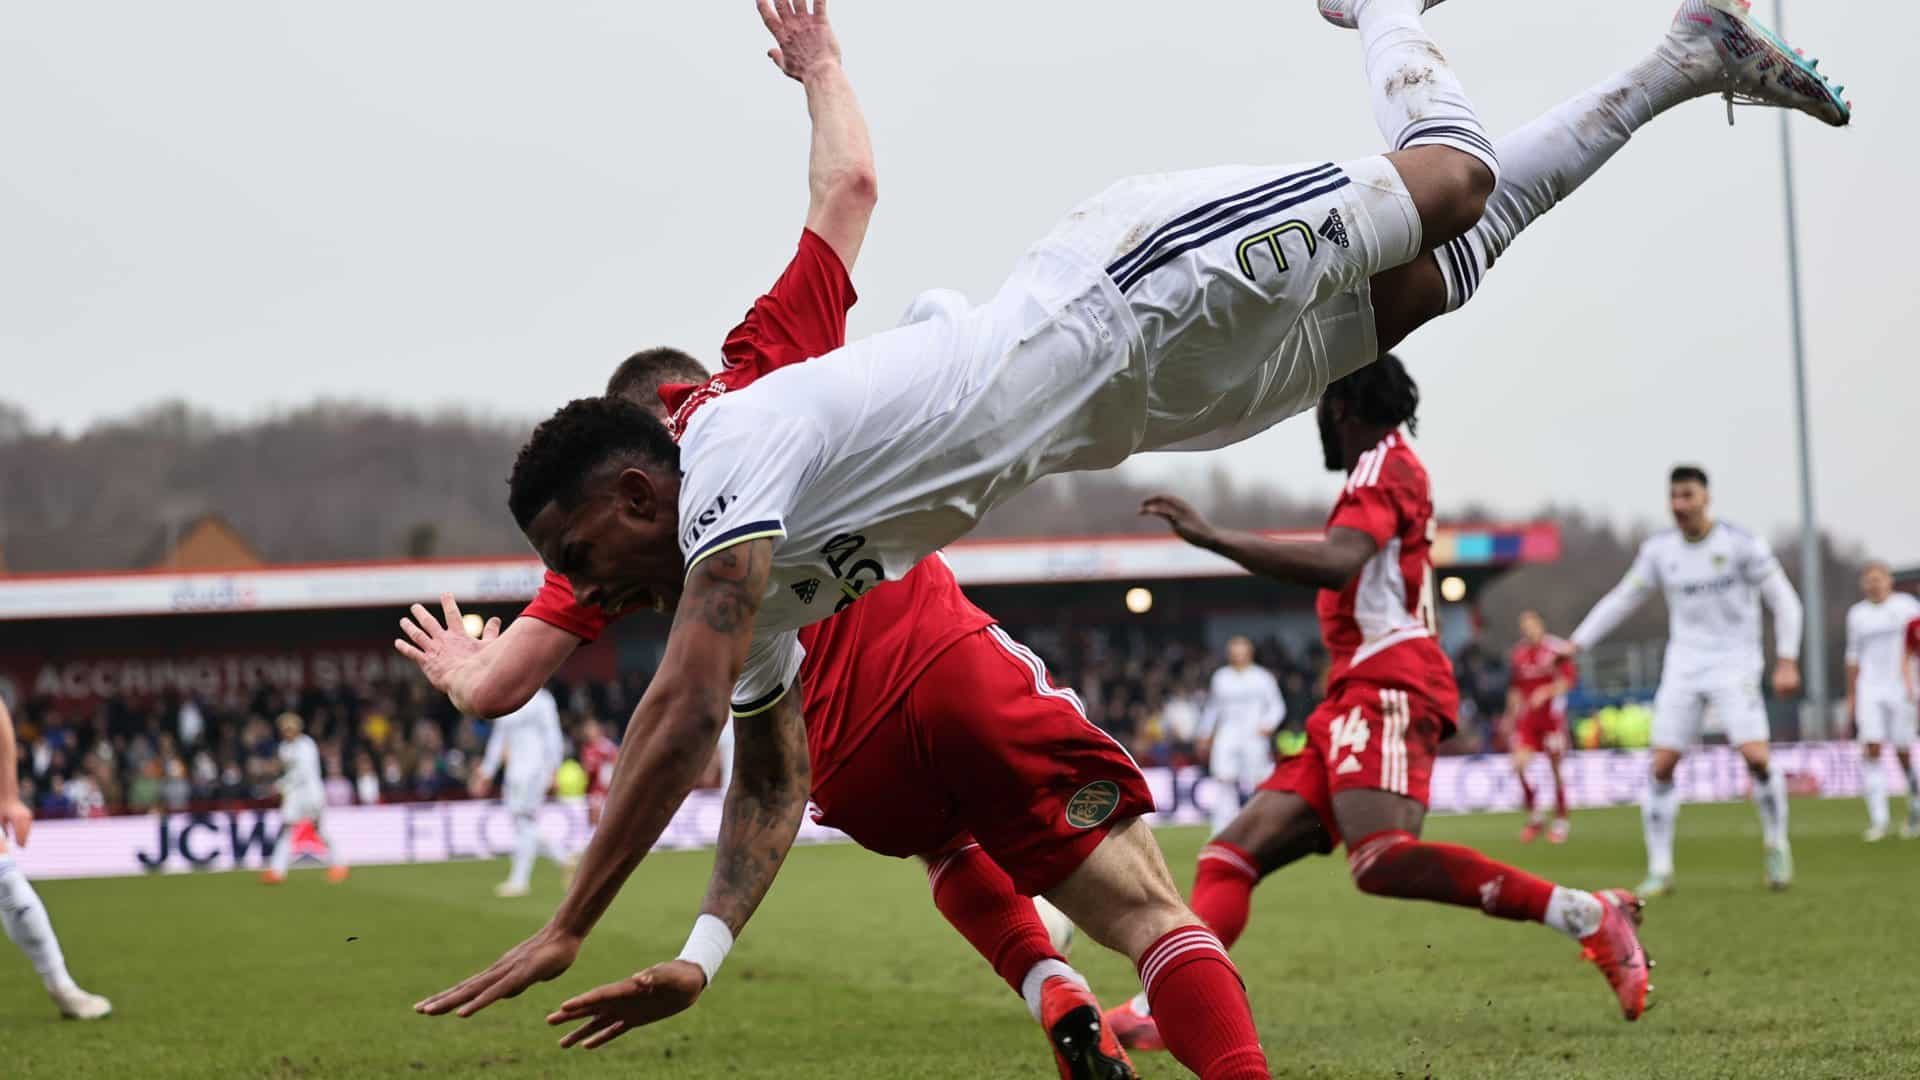 A close up photo from the sidelines of Junior Firpo, after being tackled, flying through the air at a daredevil angle